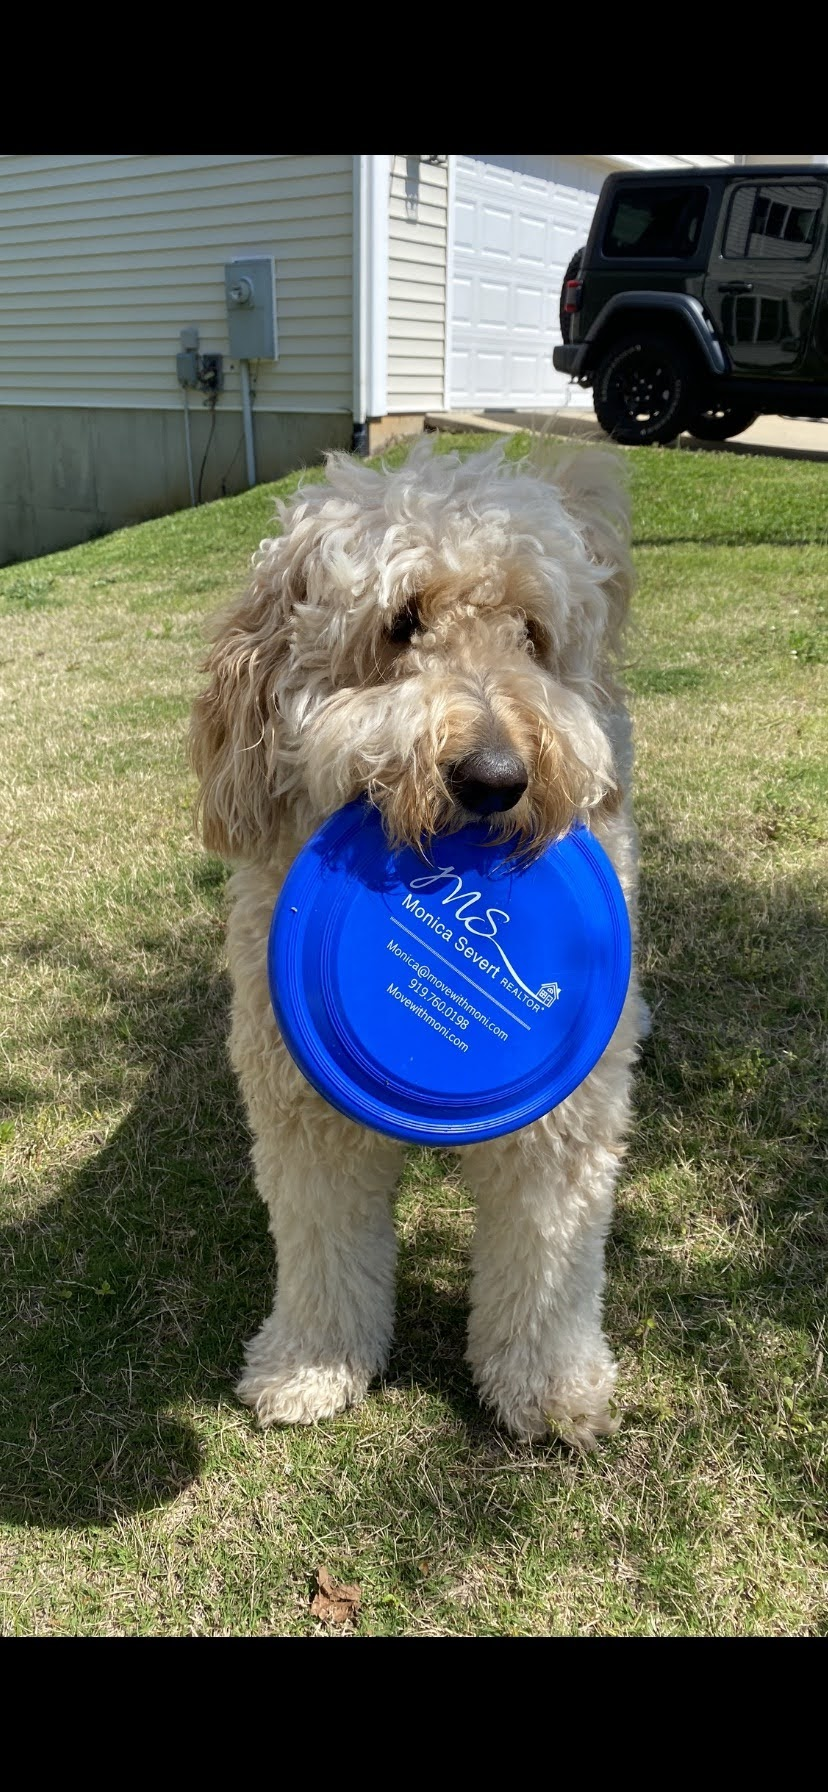 a dog holding a blue frisbee in its mouth